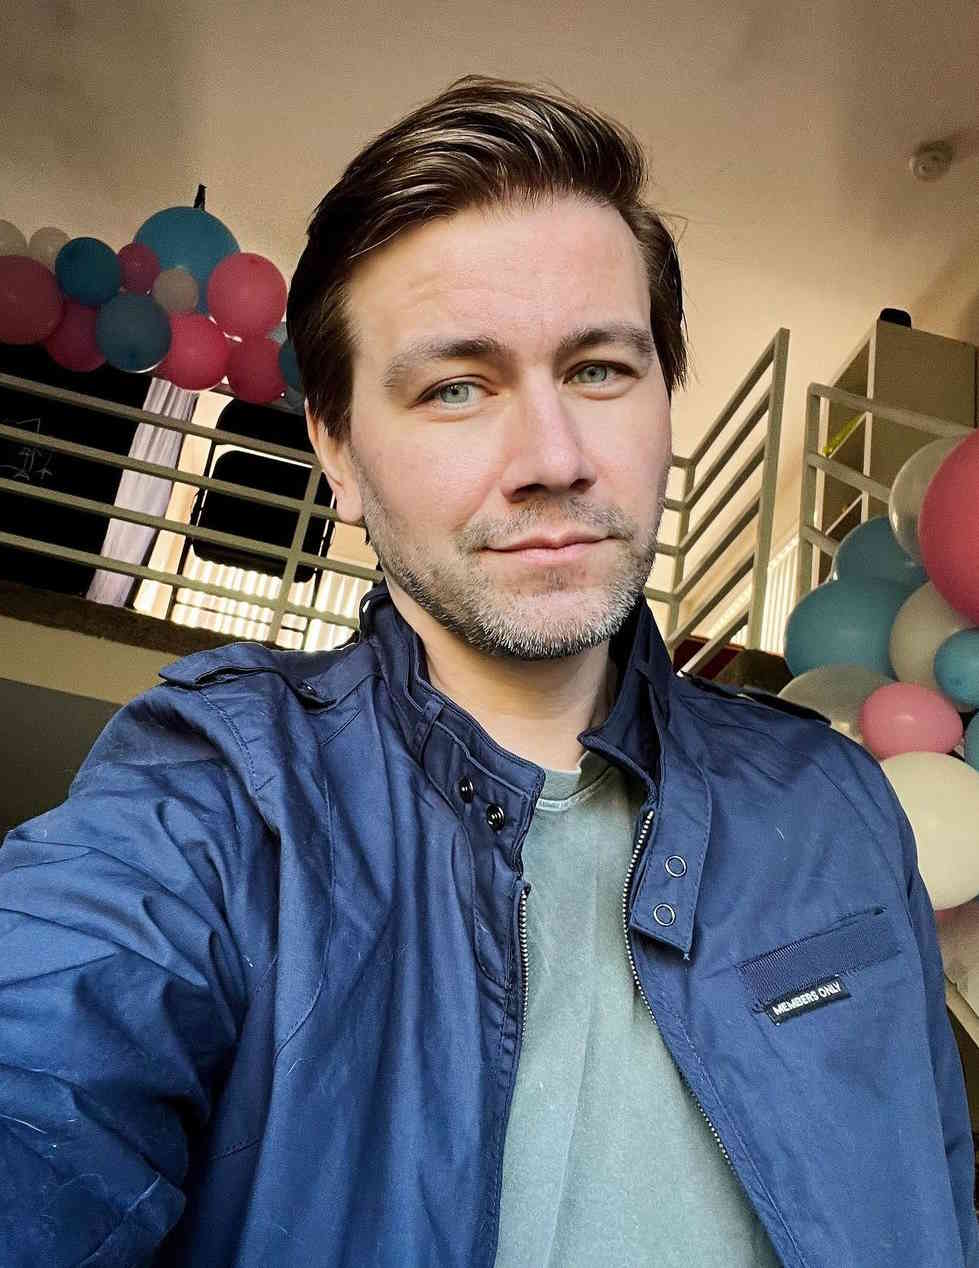 Torrance Coombs Biography, Age, Height, Weight, Girlfriend, Family, and Career